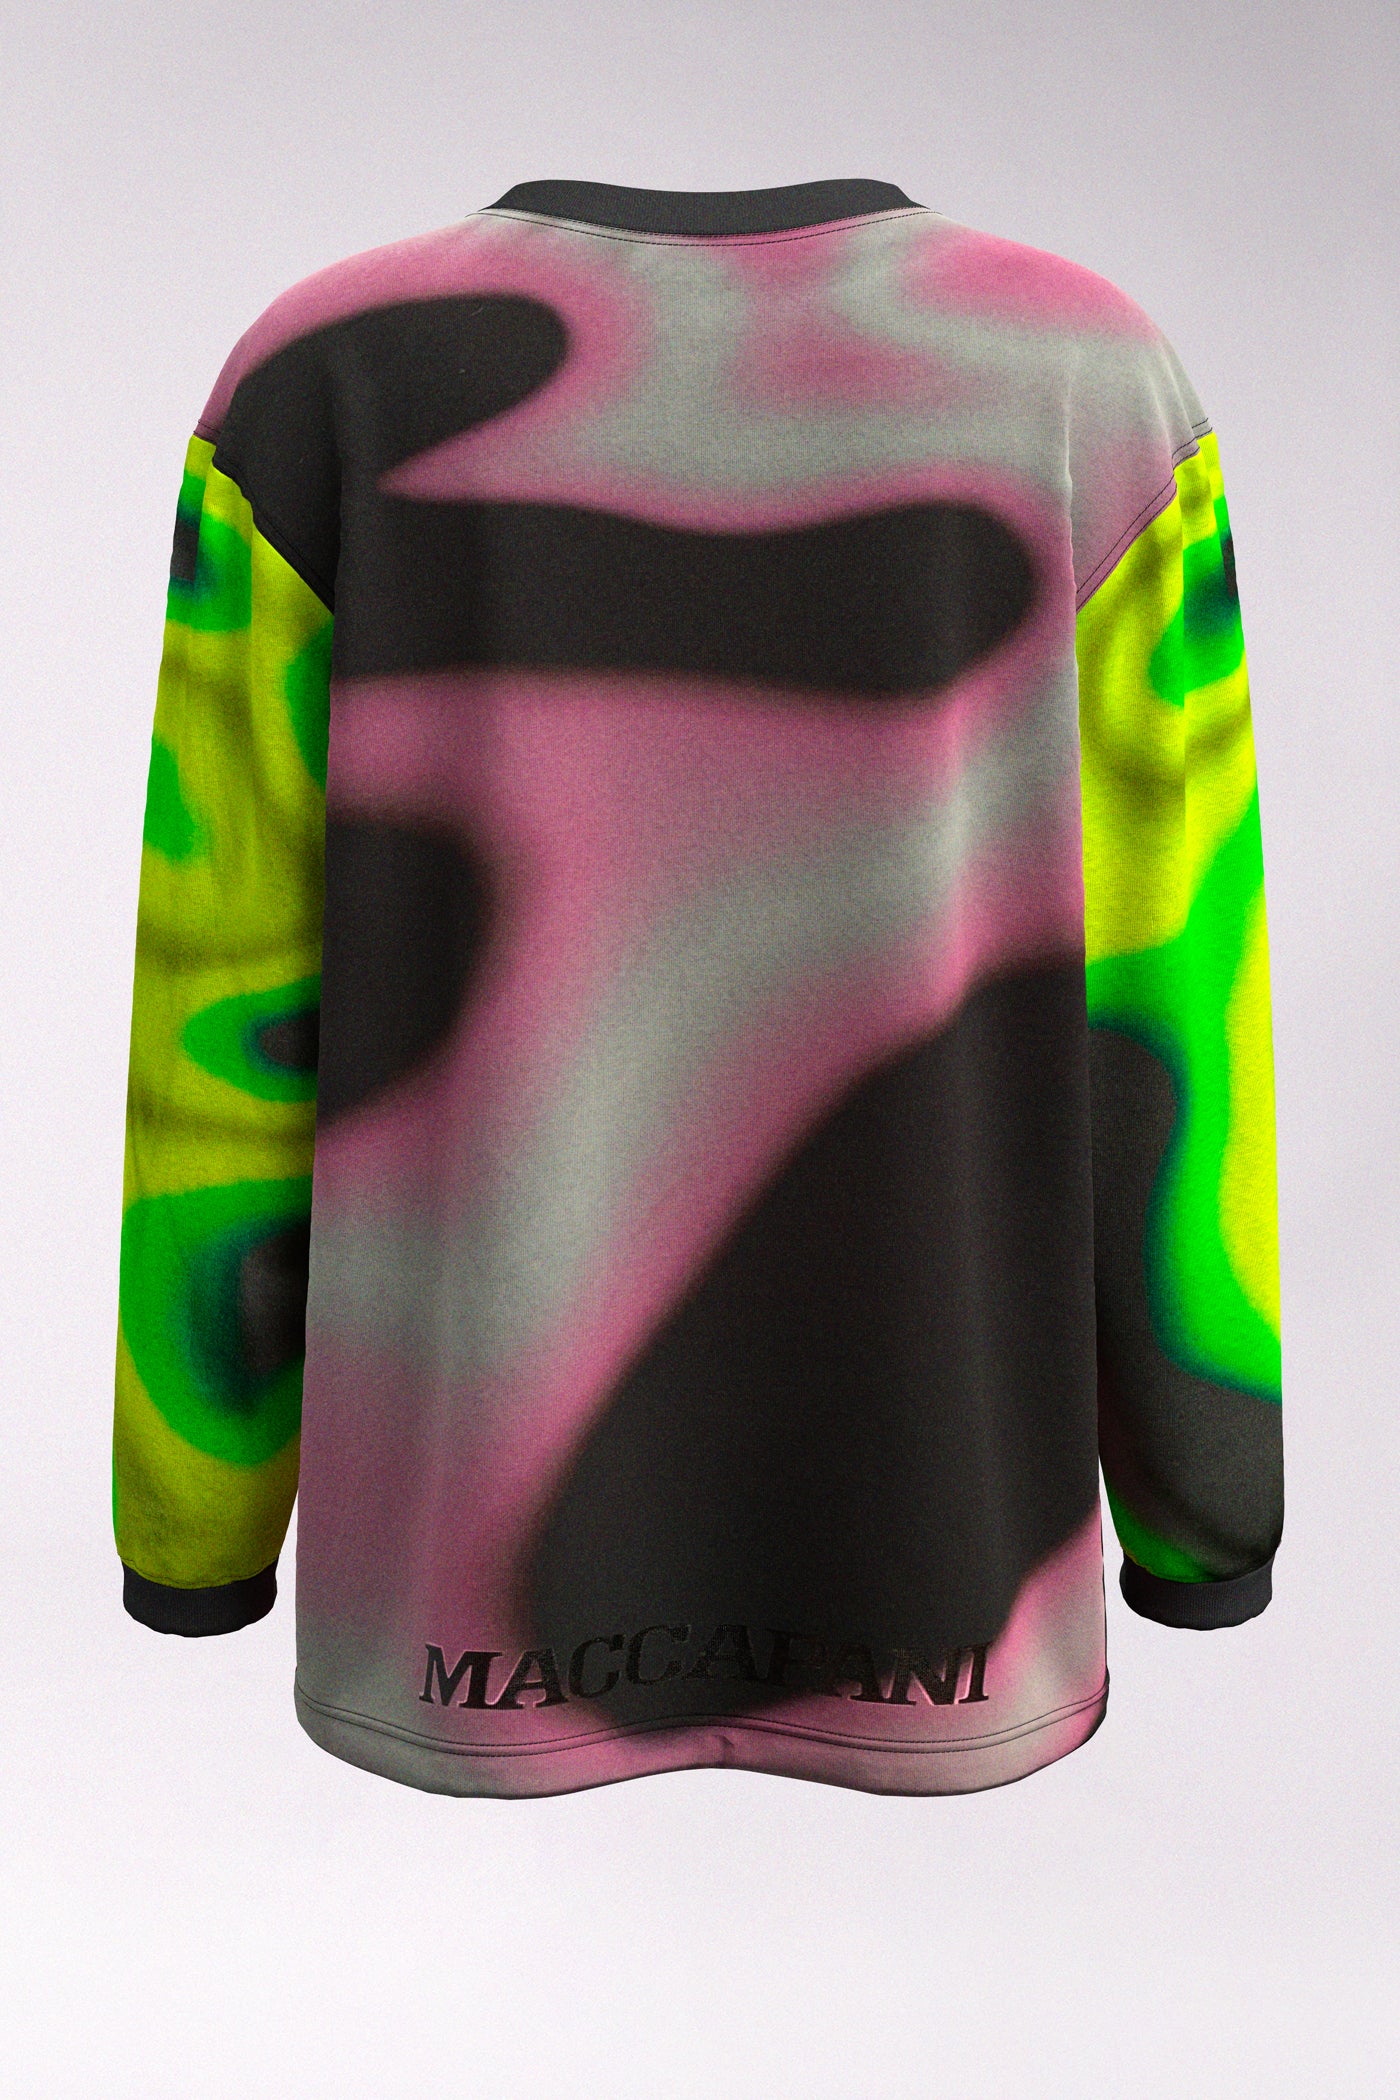 MACCAPANI - THE MOTO T - NEON GREEN AND PINK MELANGE